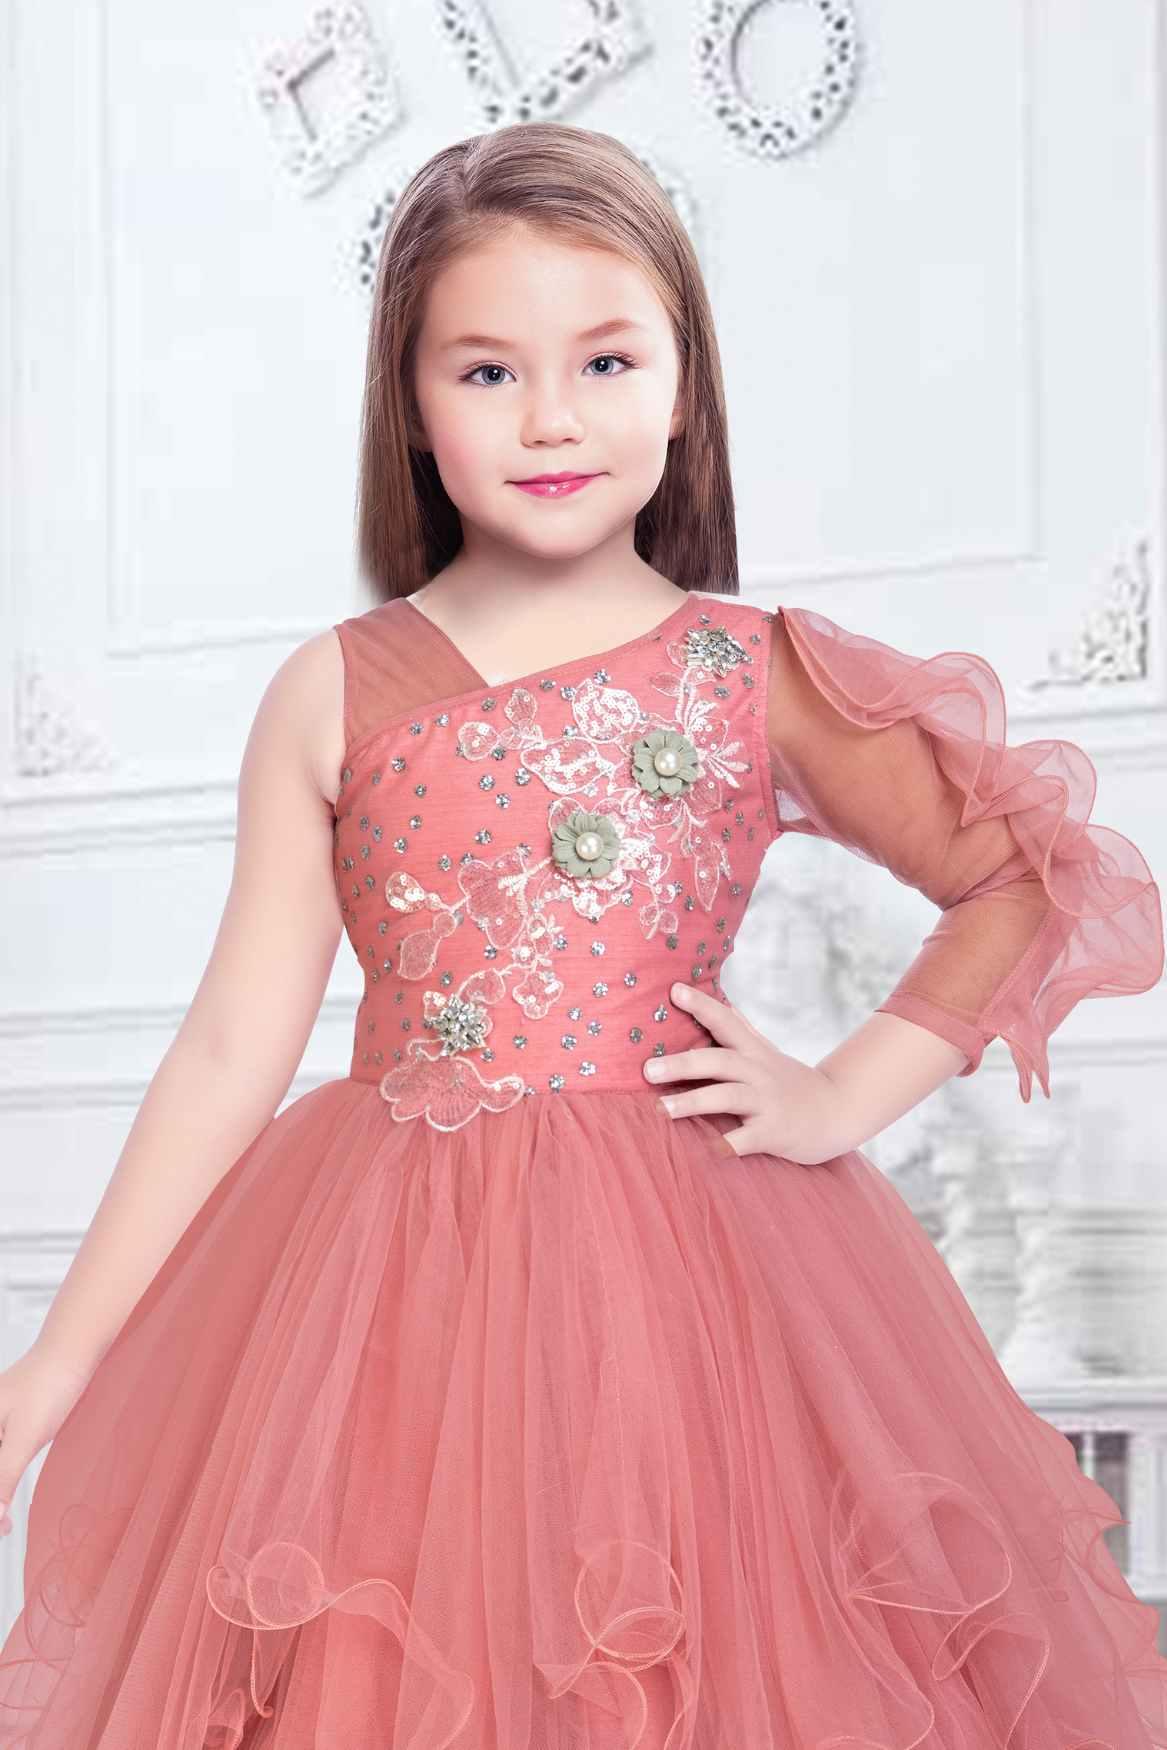 Designer One Side Ruffled Sleeve Peach Gown With Floral Embroidery For Girls - Lagorii Kids